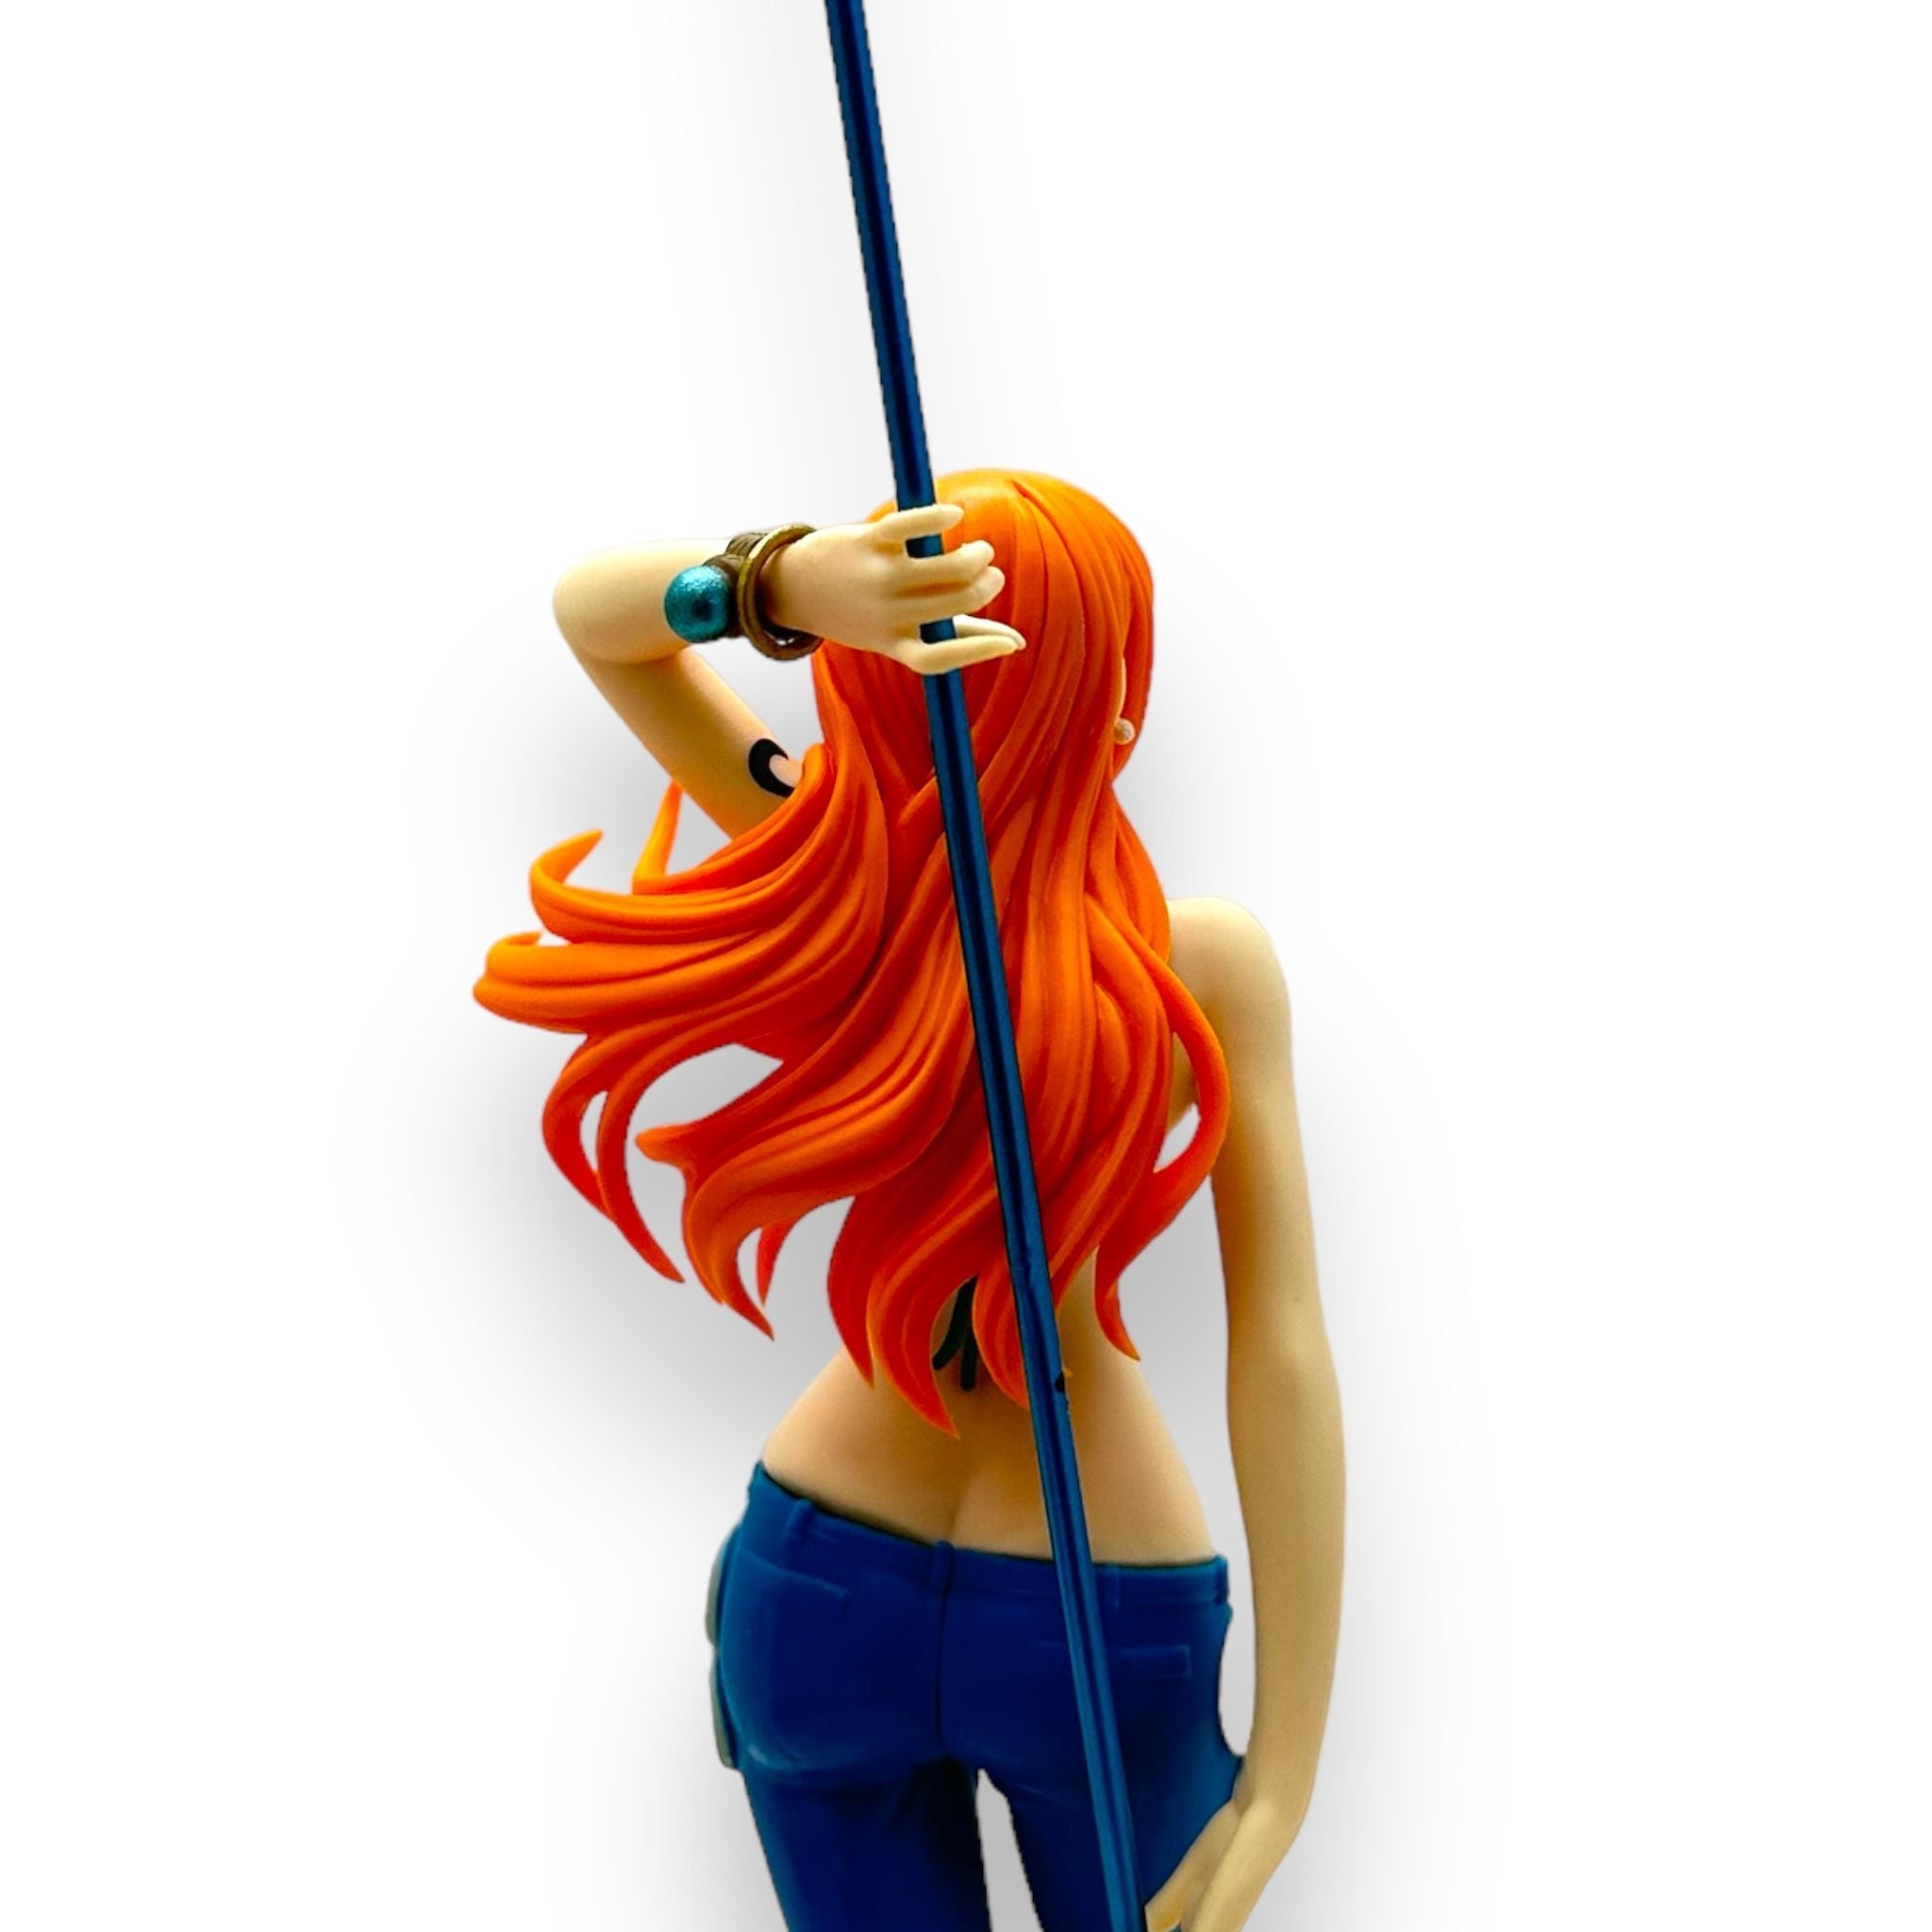 Here is Nami from One Piece by Banpresto (Glitter & Glamour